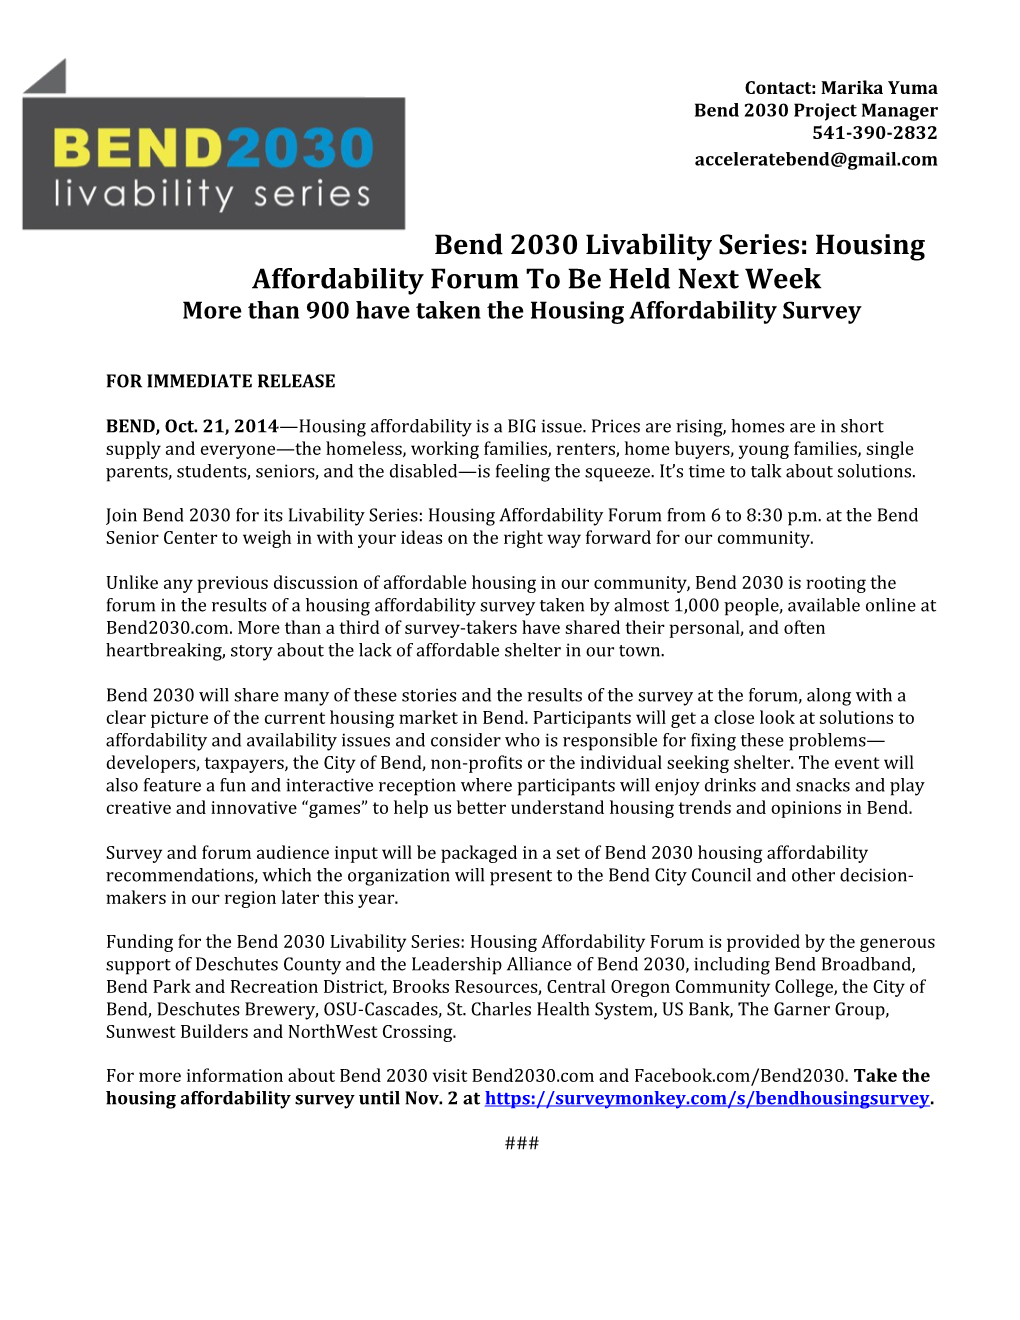 Bend 2030 Livability Series: Housing Affordability Forum to Be Held Next Week